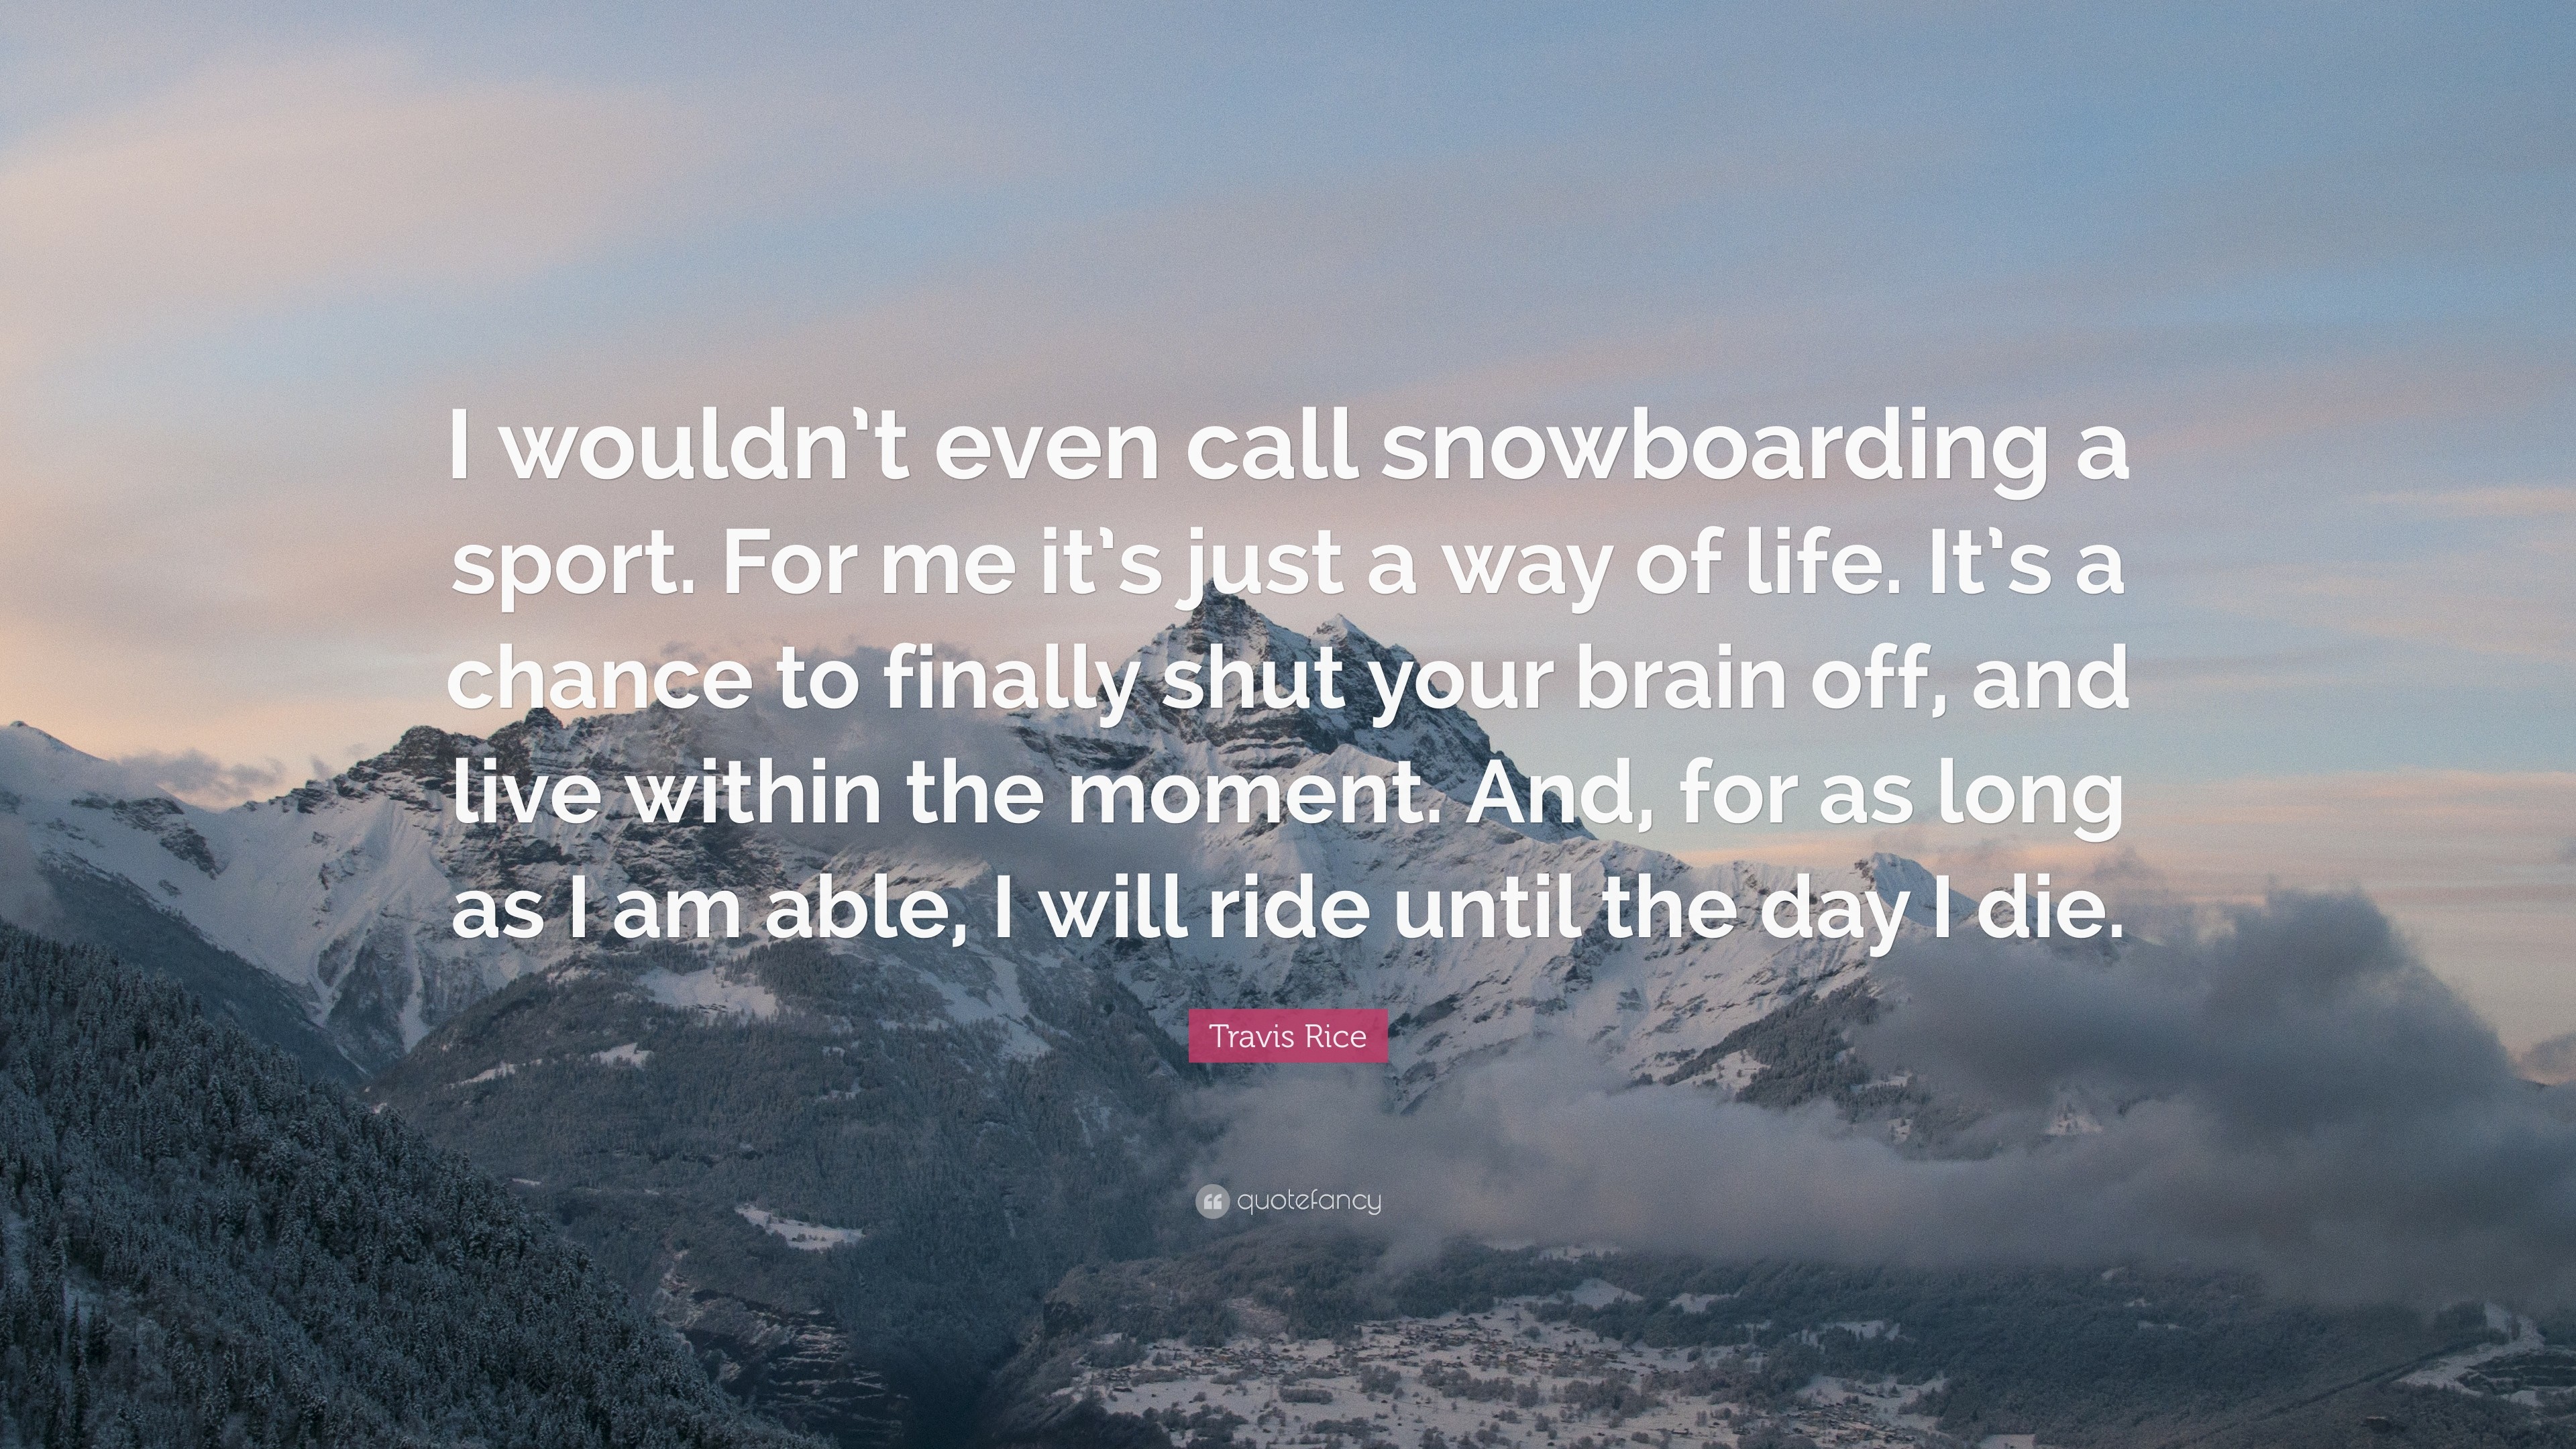 3840x2160 Travis Rice Quote: “I wouldn't even call snowboarding a sport. For